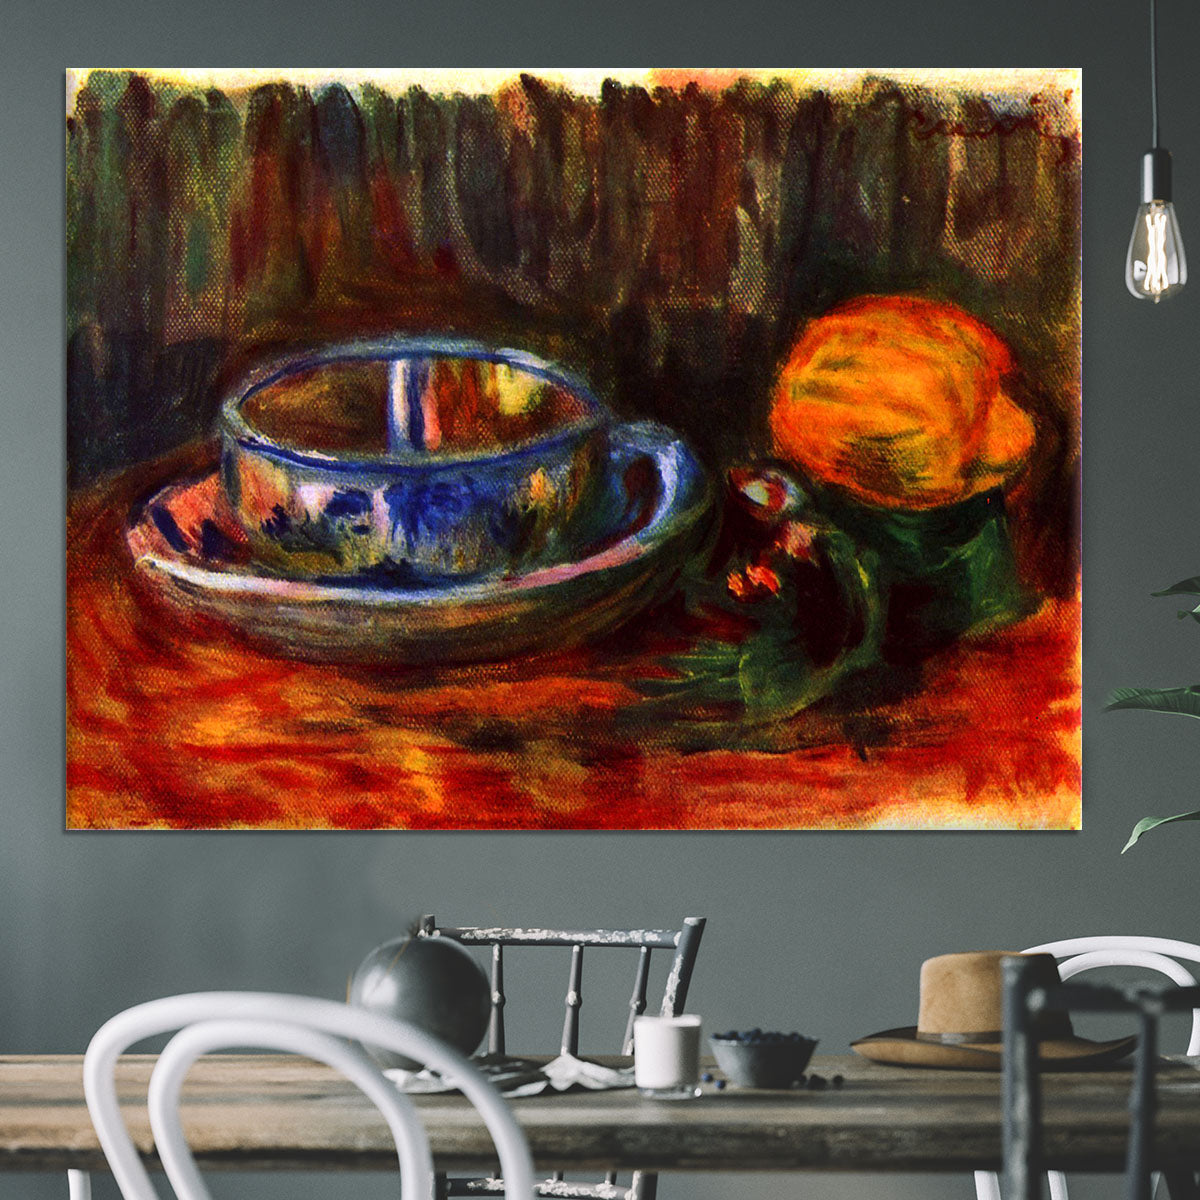 Still life with cup by Renoir Canvas Print or Poster - Canvas Art Rocks - 3